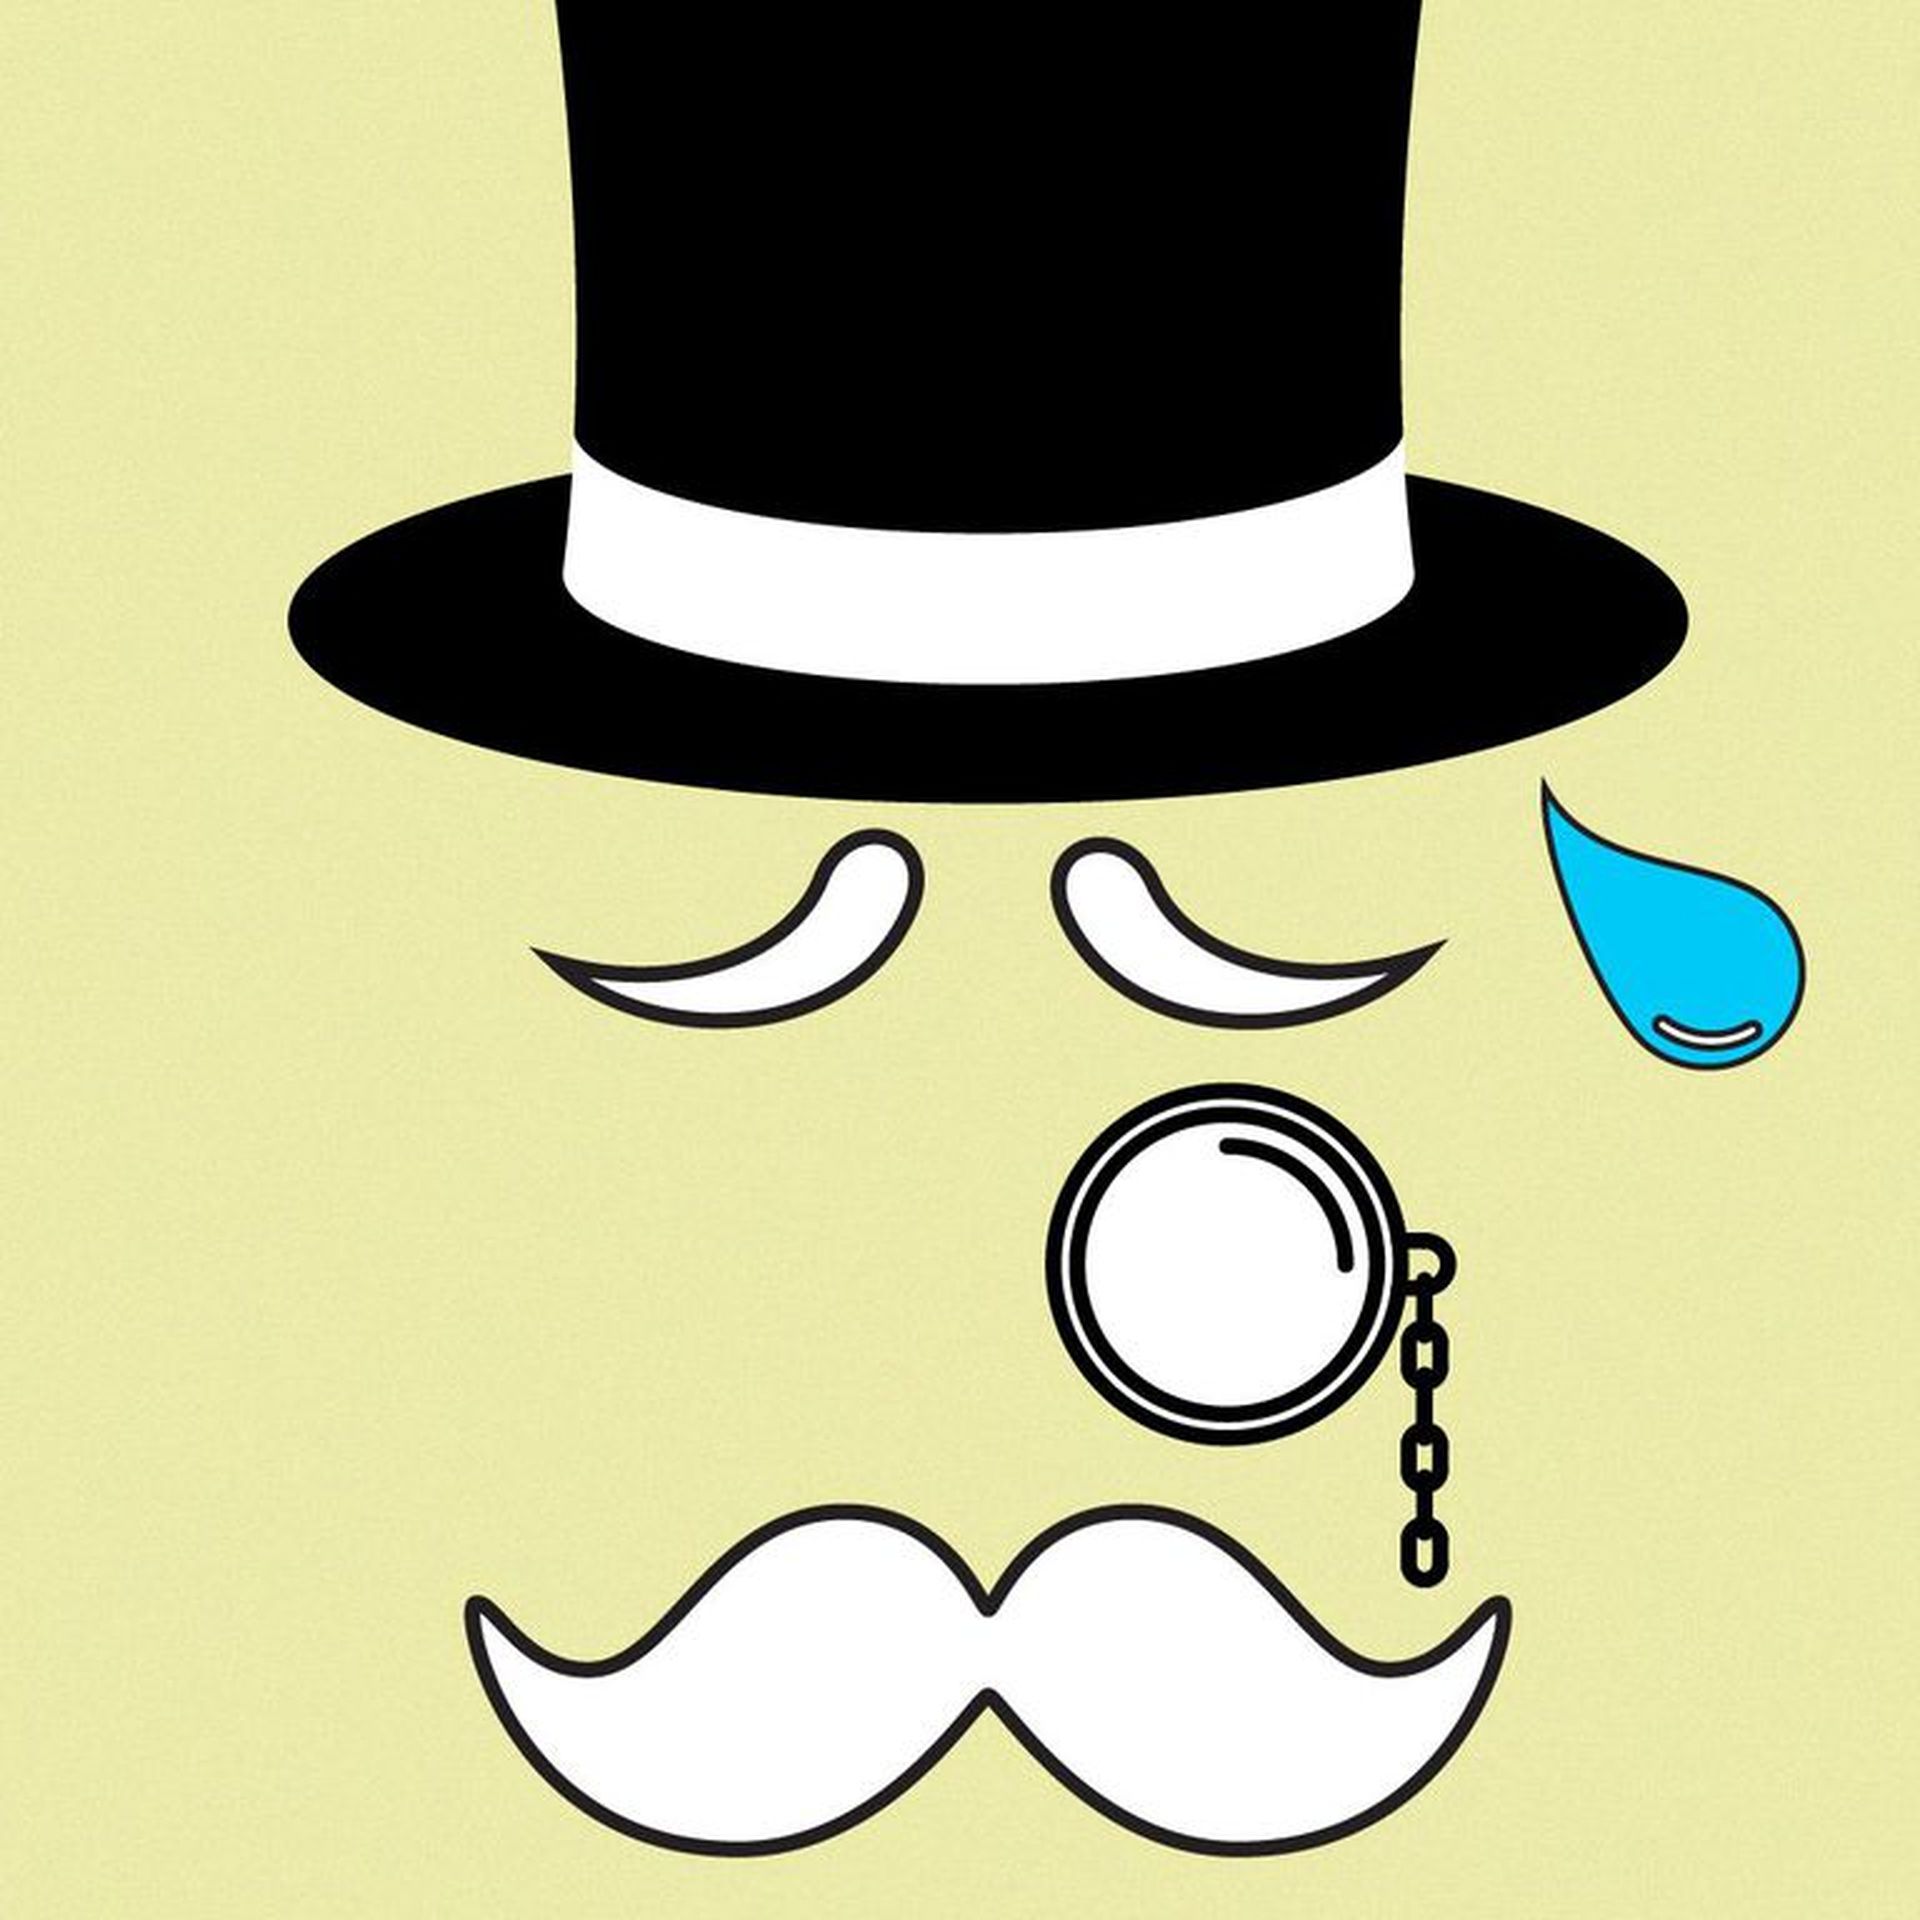 Crying monopoly man with monocle